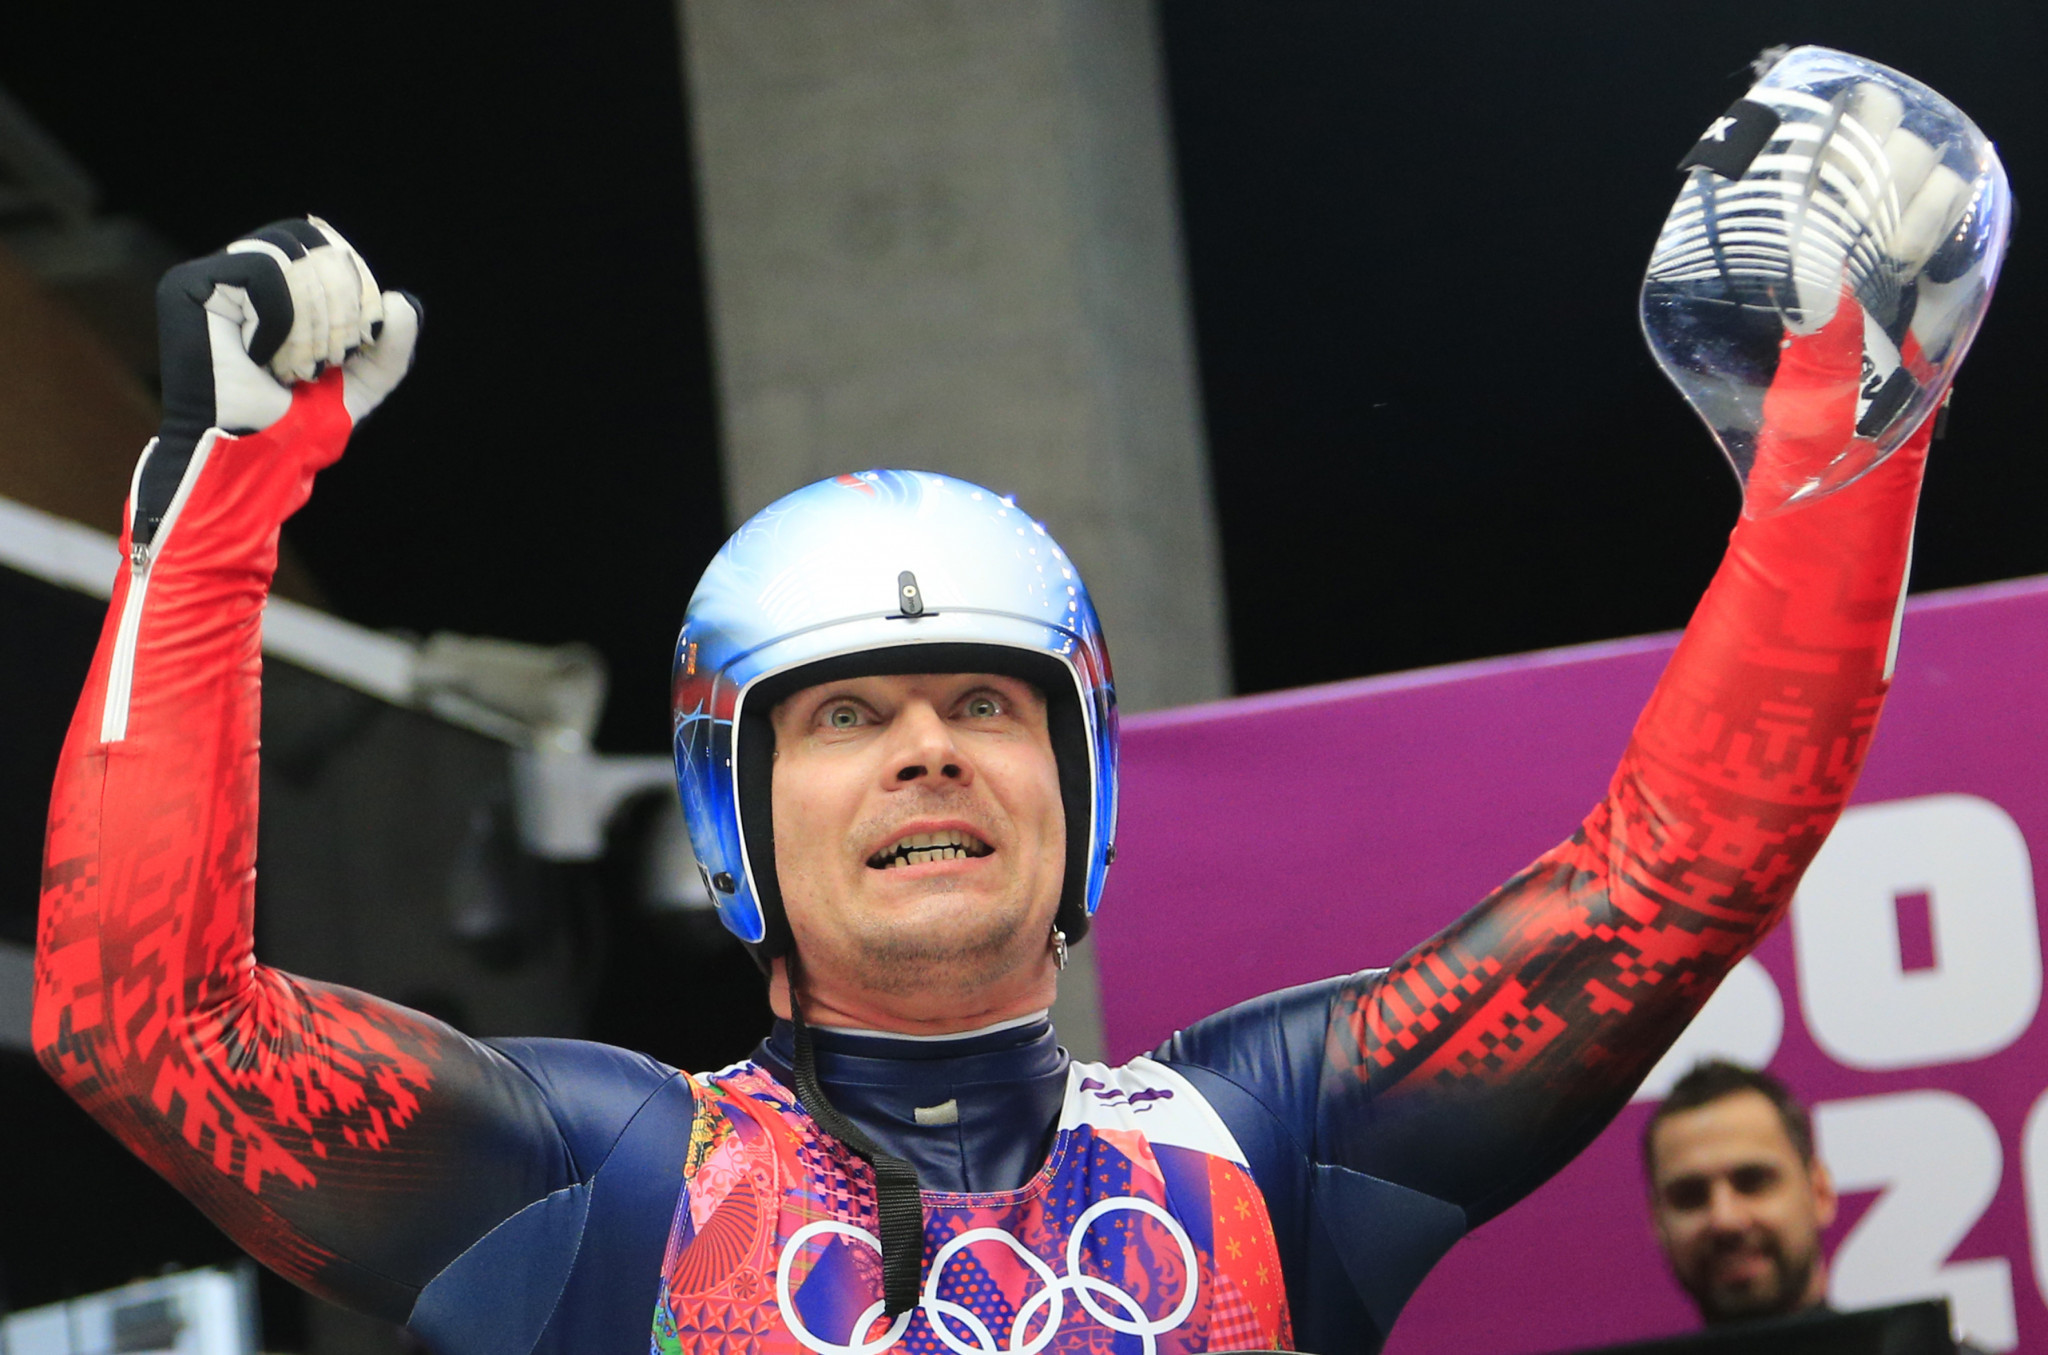 Two-time Sochi 2014 medallist Albert Demchenko was among the Russian officials removed from FIL positions ©Getty Images